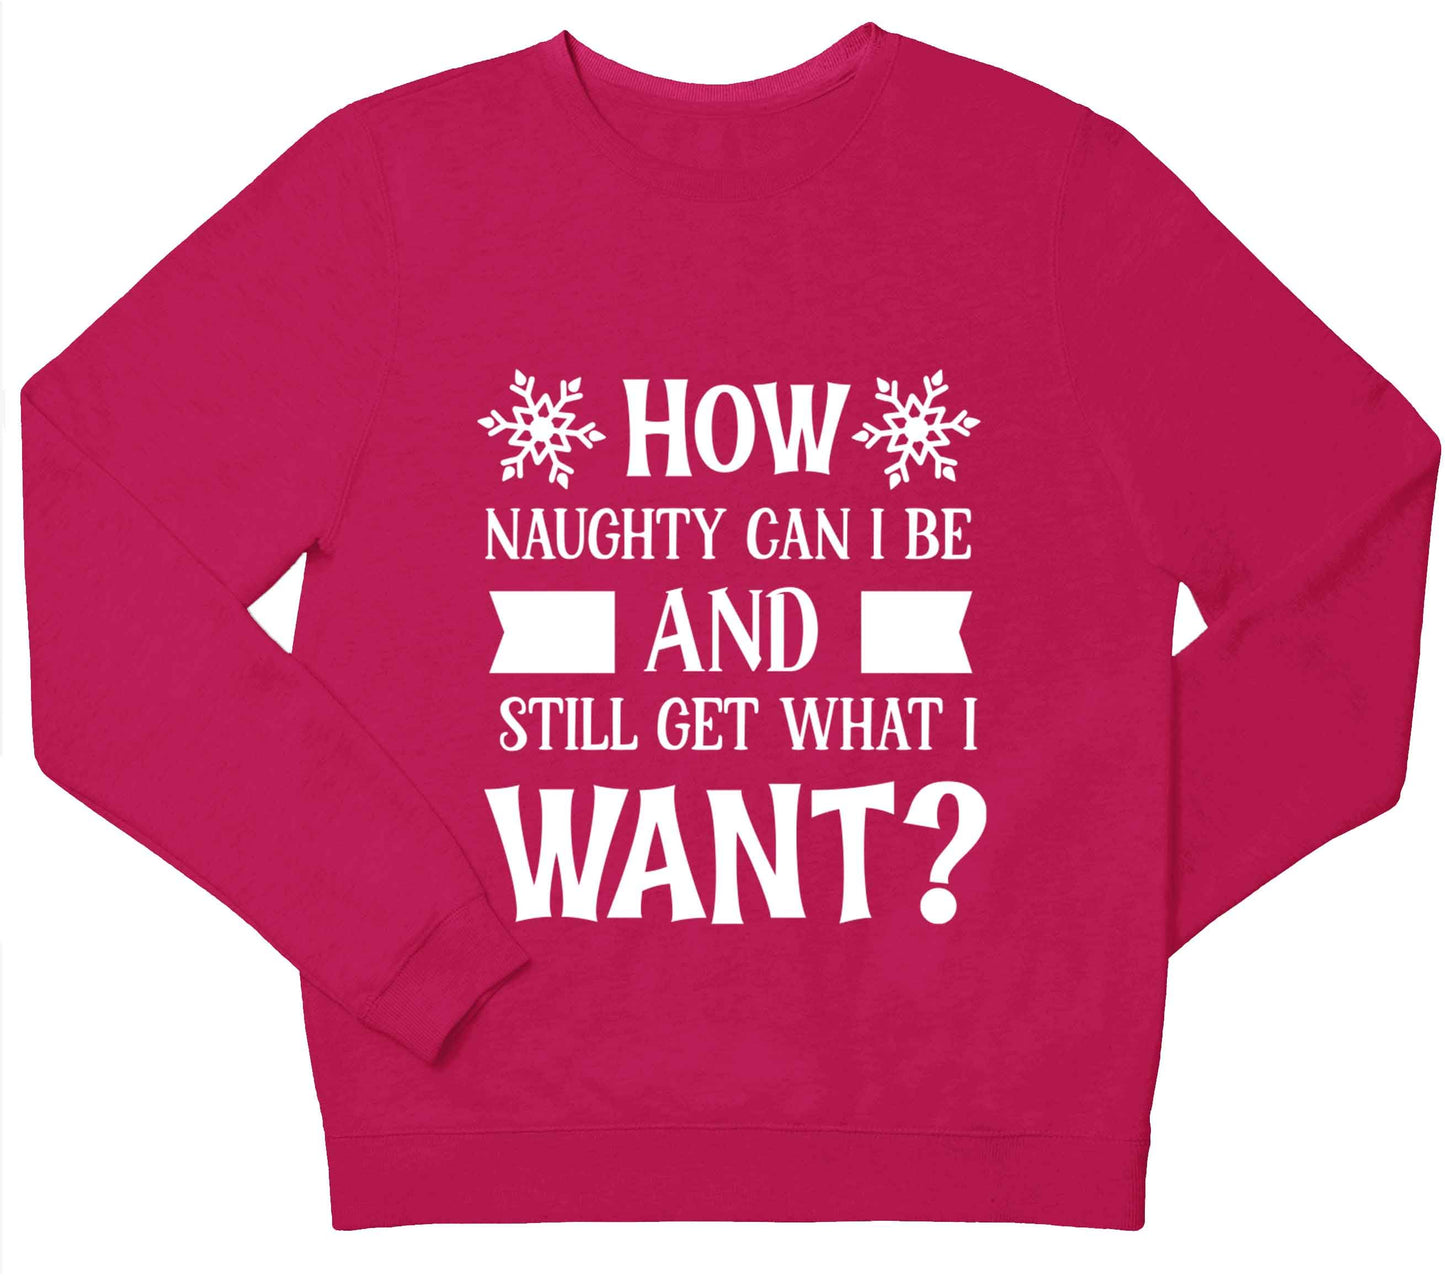 How naughty can I be and still get what I want? children's pink sweater 12-13 Years